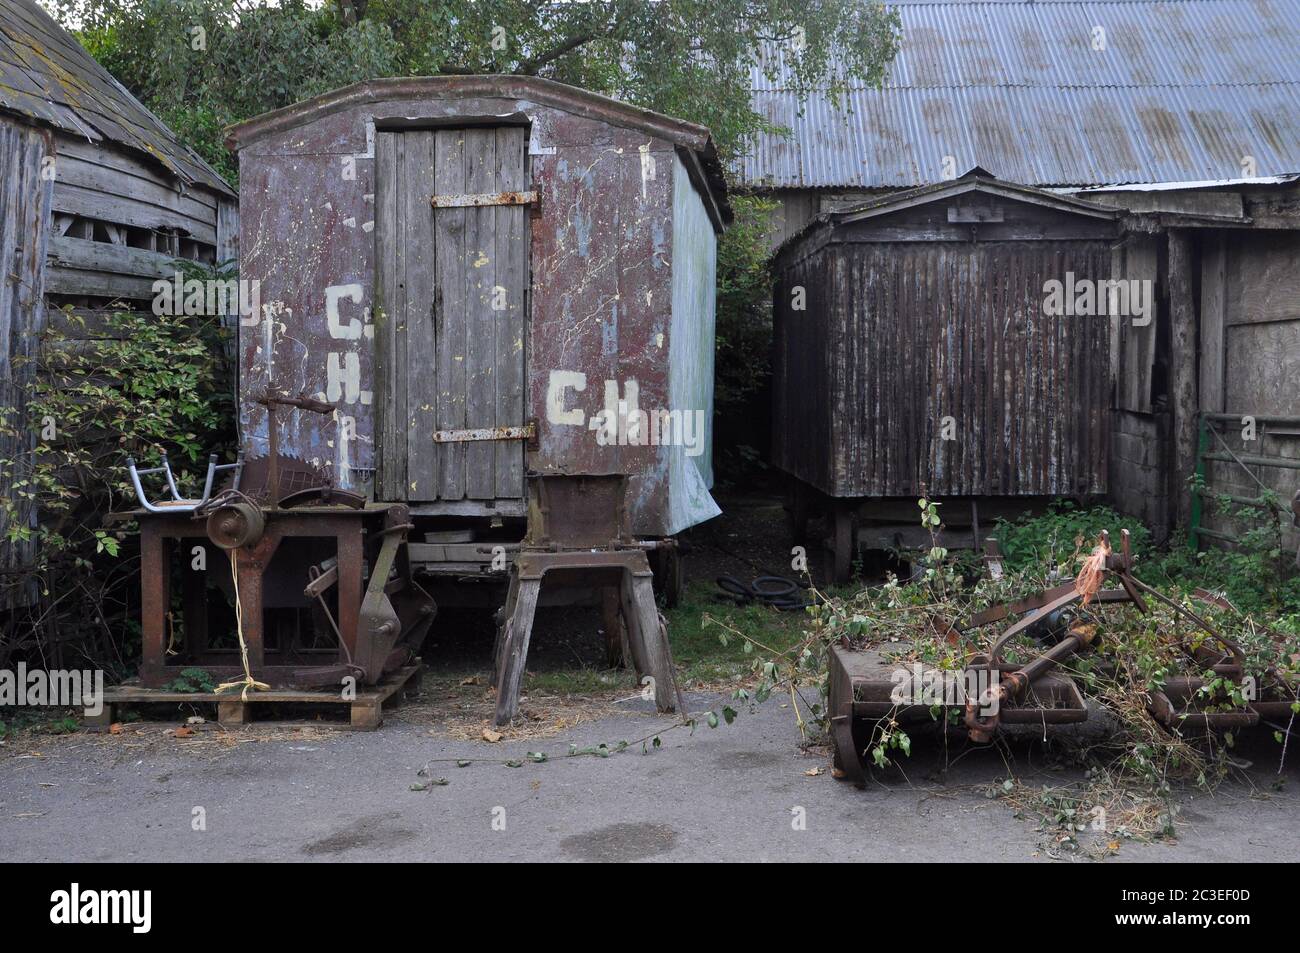 Derelict old wheeled shepherds huts used for storage and old farm machinery in a farm yard at Purbeck in Dorset.UK Stock Photo